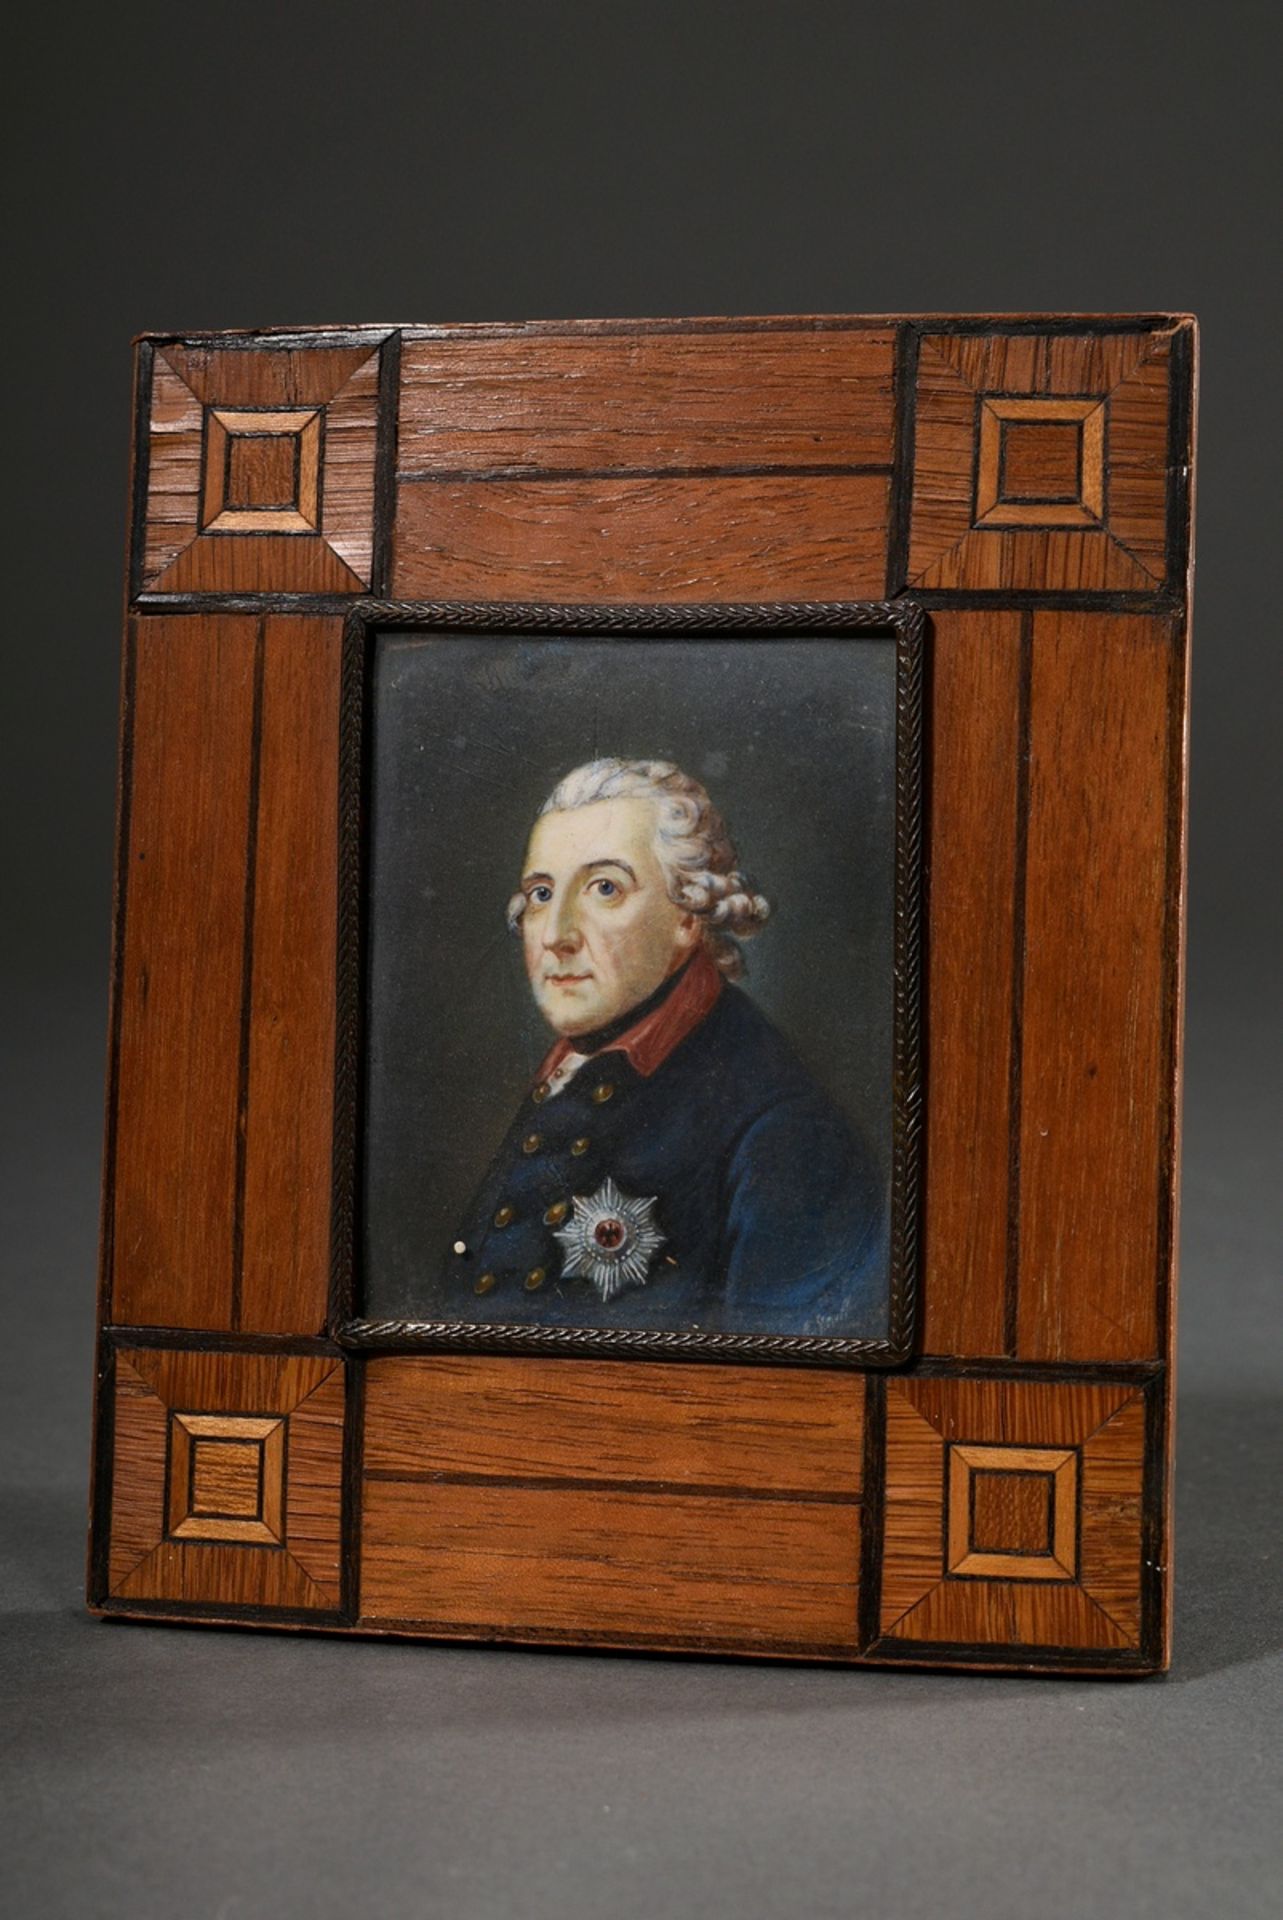 Miniature "Friedrich der Große" (Frederick the Great) after a painting by Anton Graff (c. 1781/86),